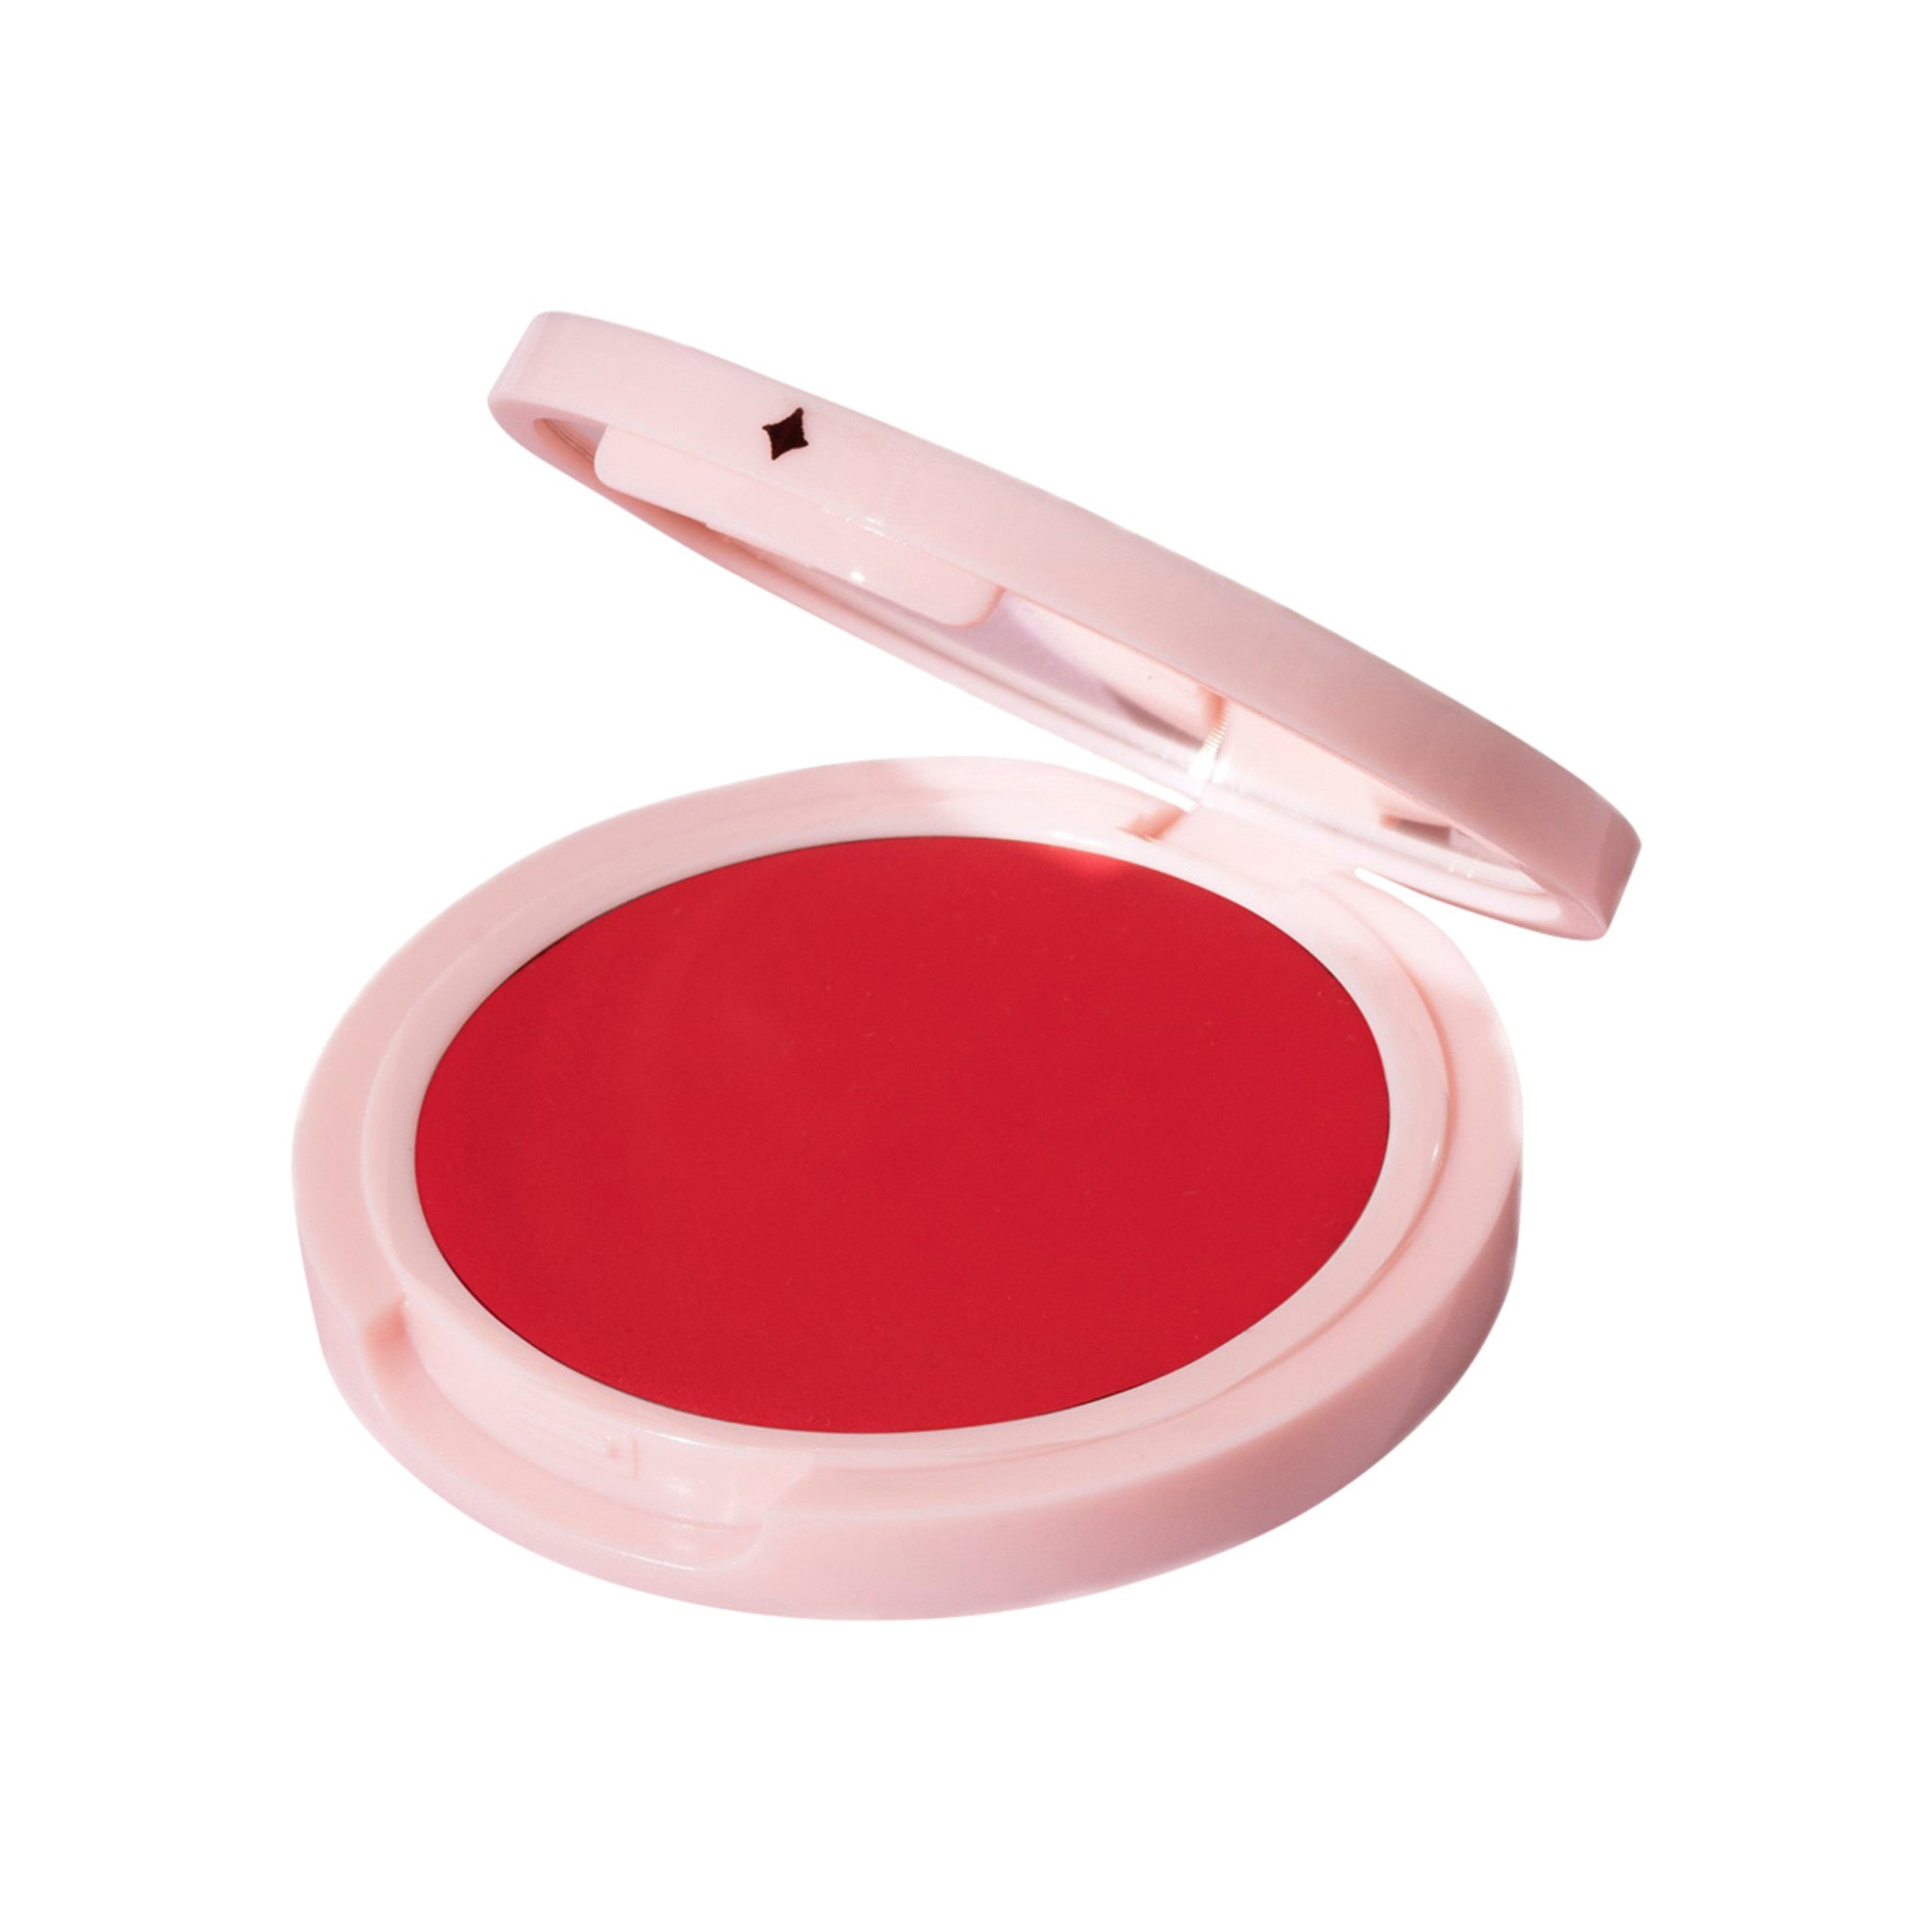 Jillian Dempsey Cheek Tint Color/Shade variant: Scarlet main image. This product is in the color red